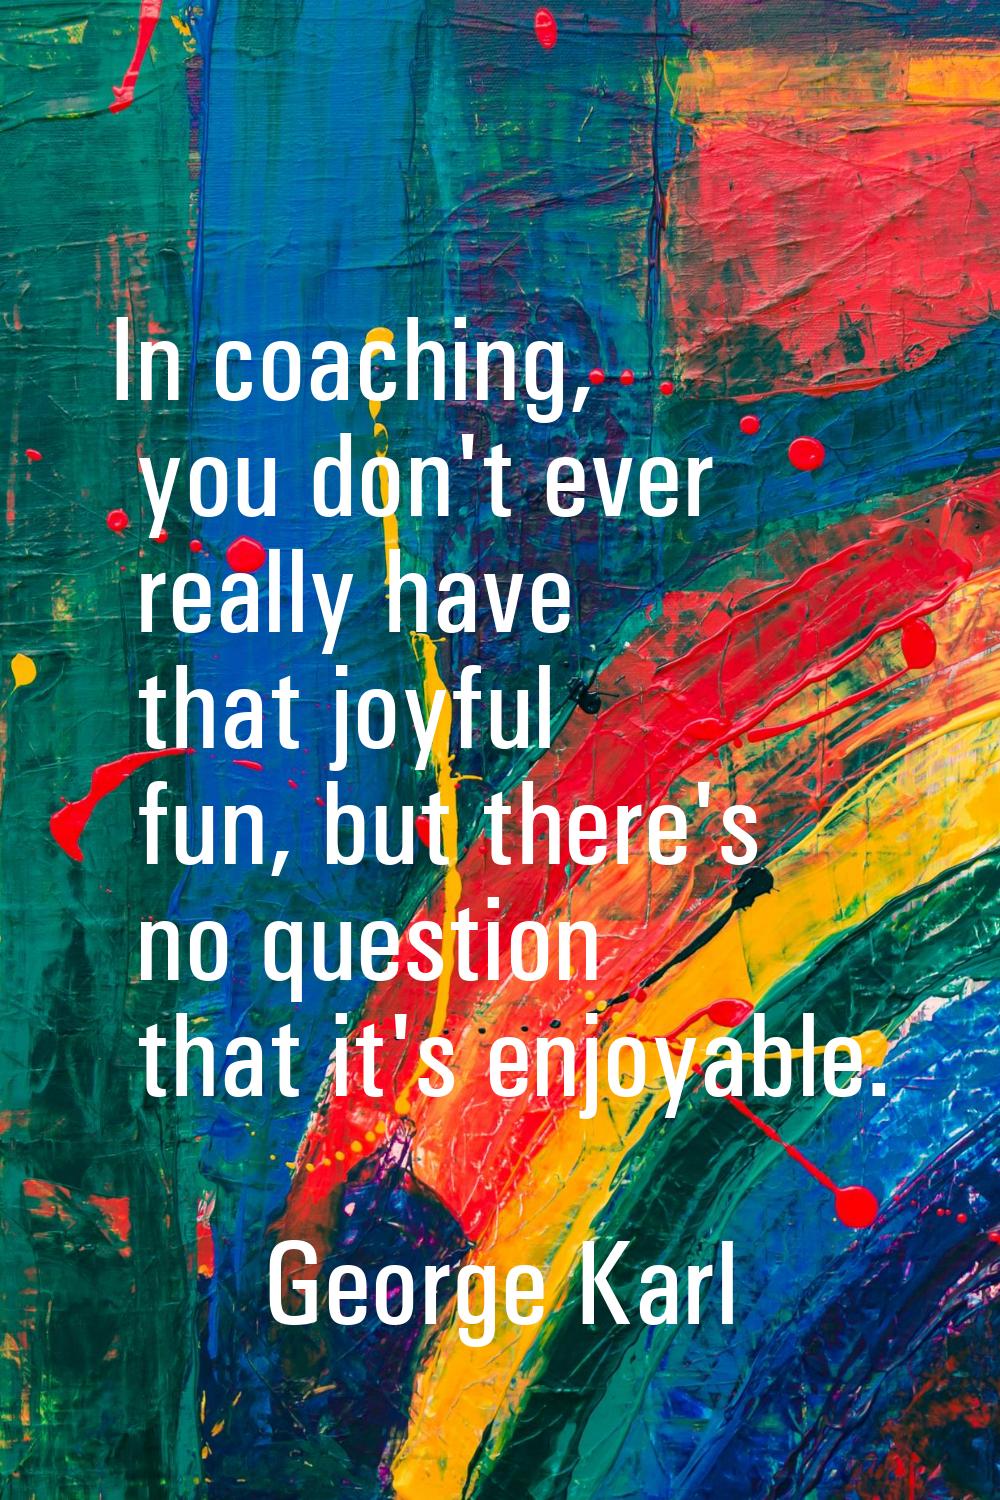 In coaching, you don't ever really have that joyful fun, but there's no question that it's enjoyabl